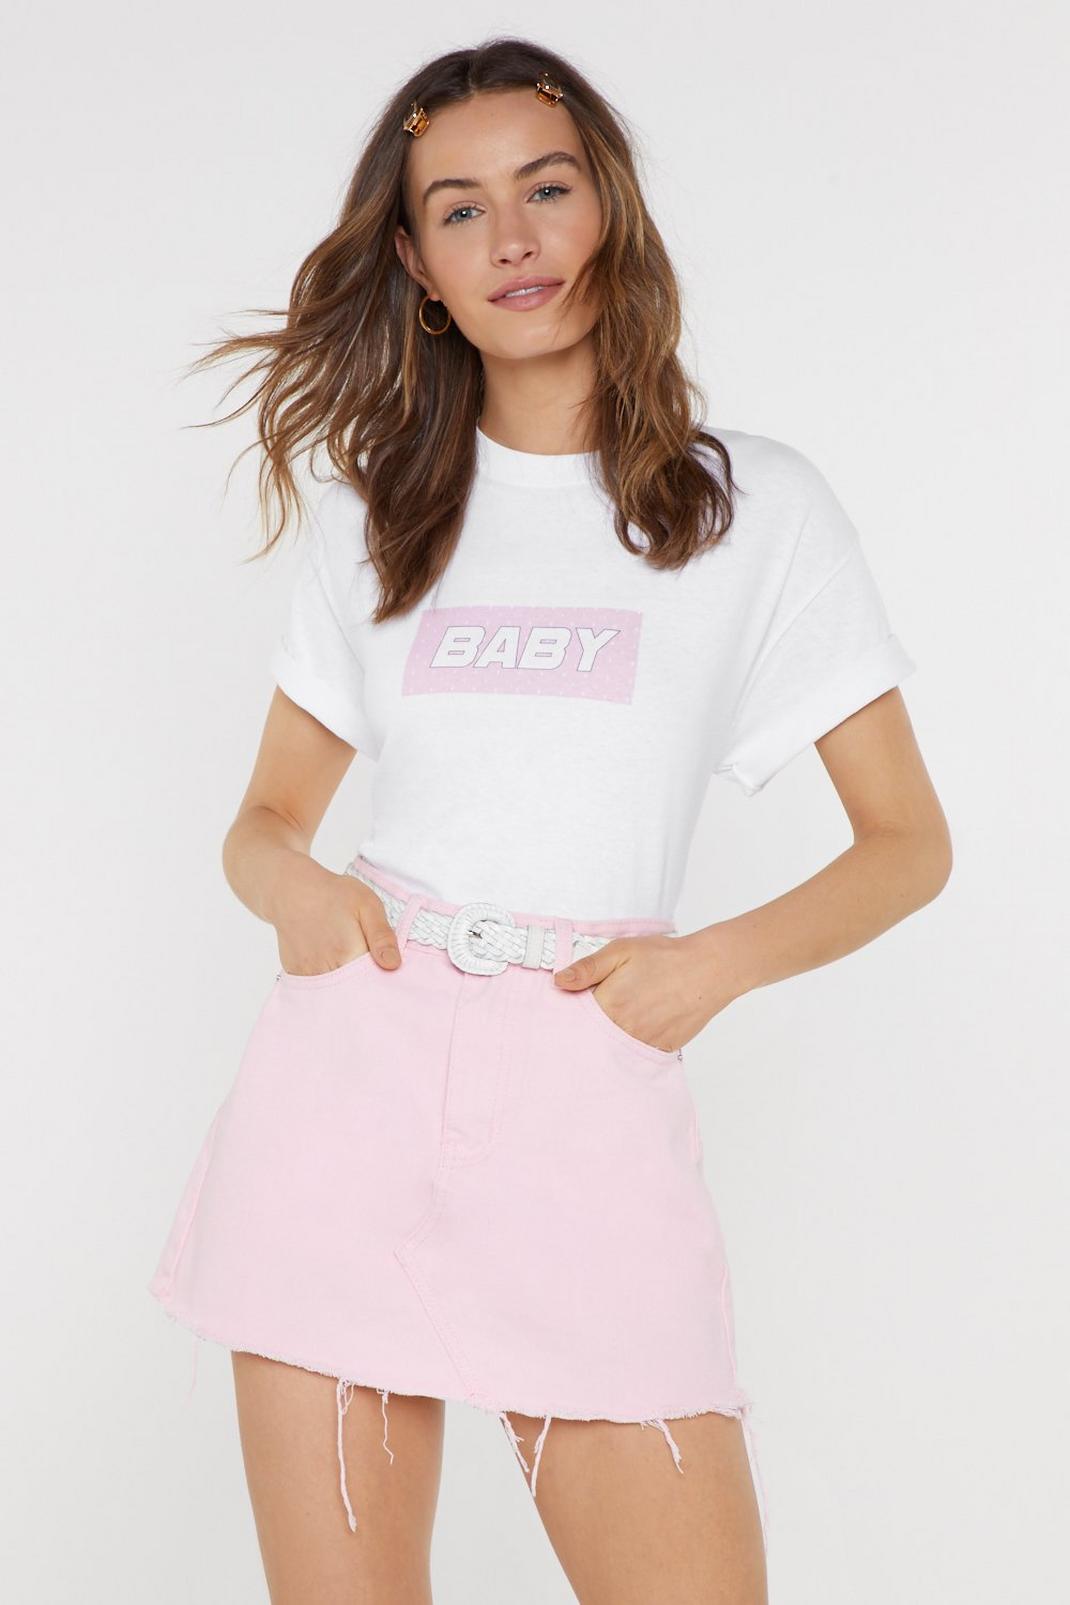 Call Me Baby Graphic Tee image number 1